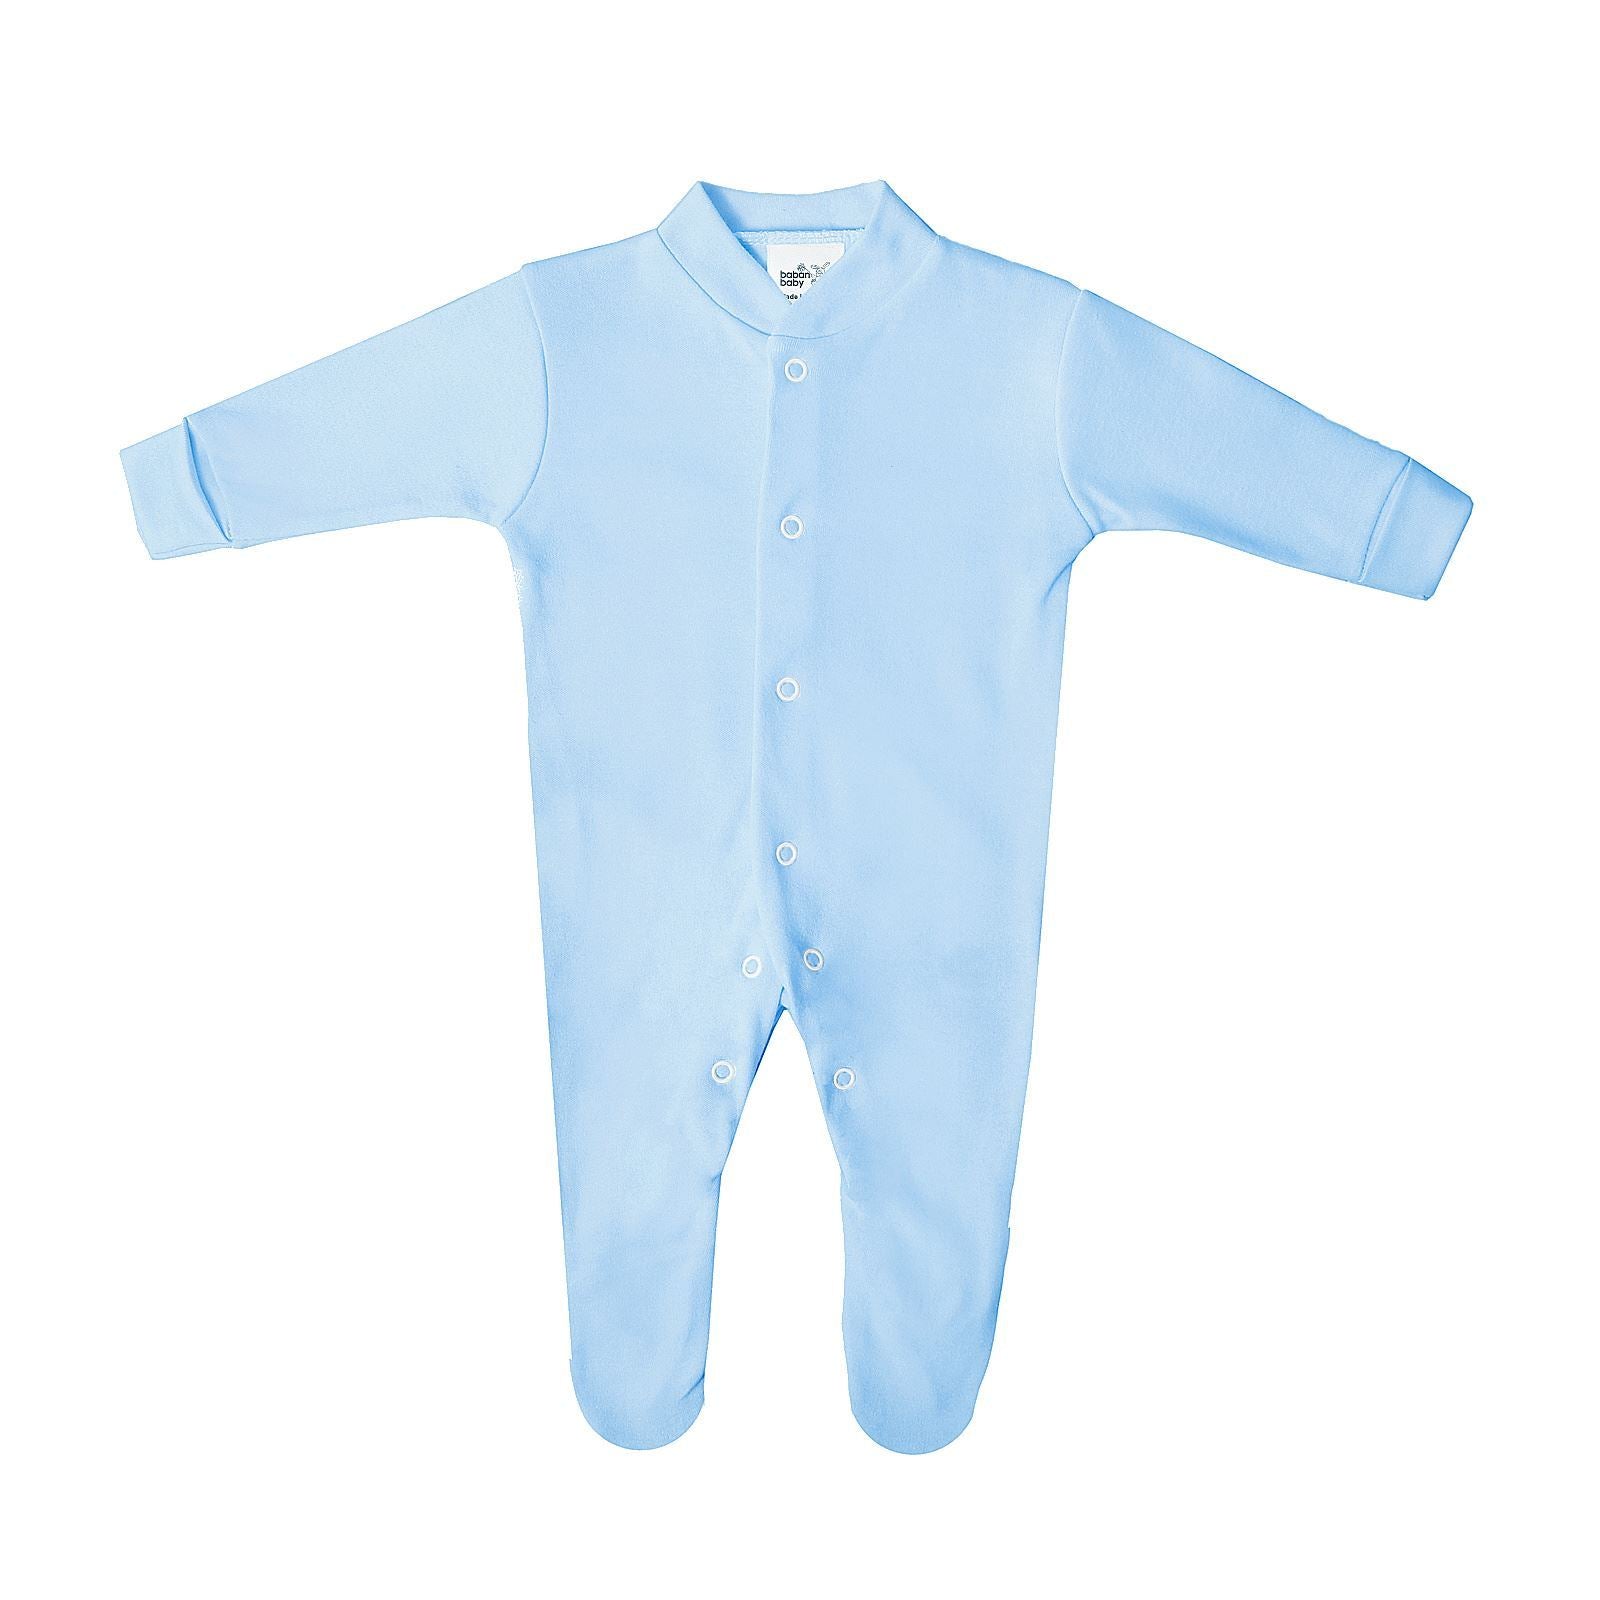 Premature Tiny Baby Boys Sleepsuits, Preemie Baby Grows, 2 Pack - Blue